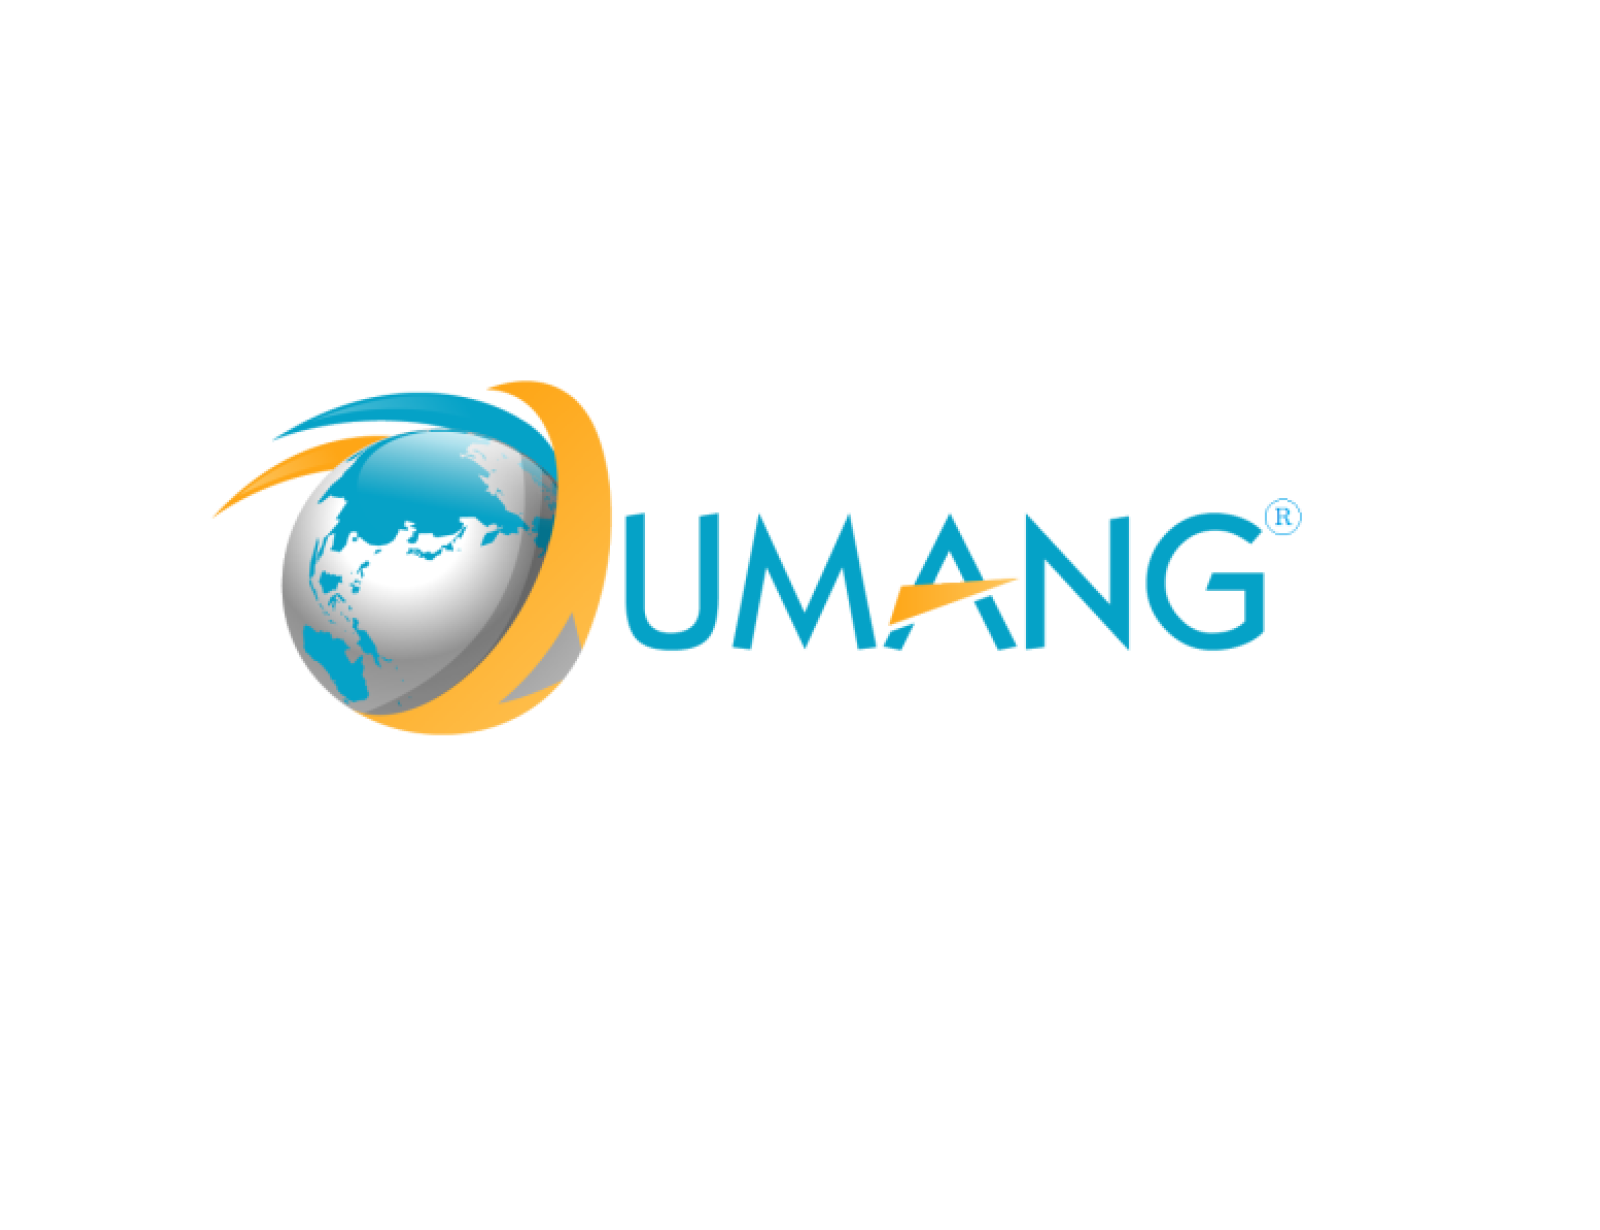 UMANG Welfare Society - our logo depicting our vision :) | Facebook